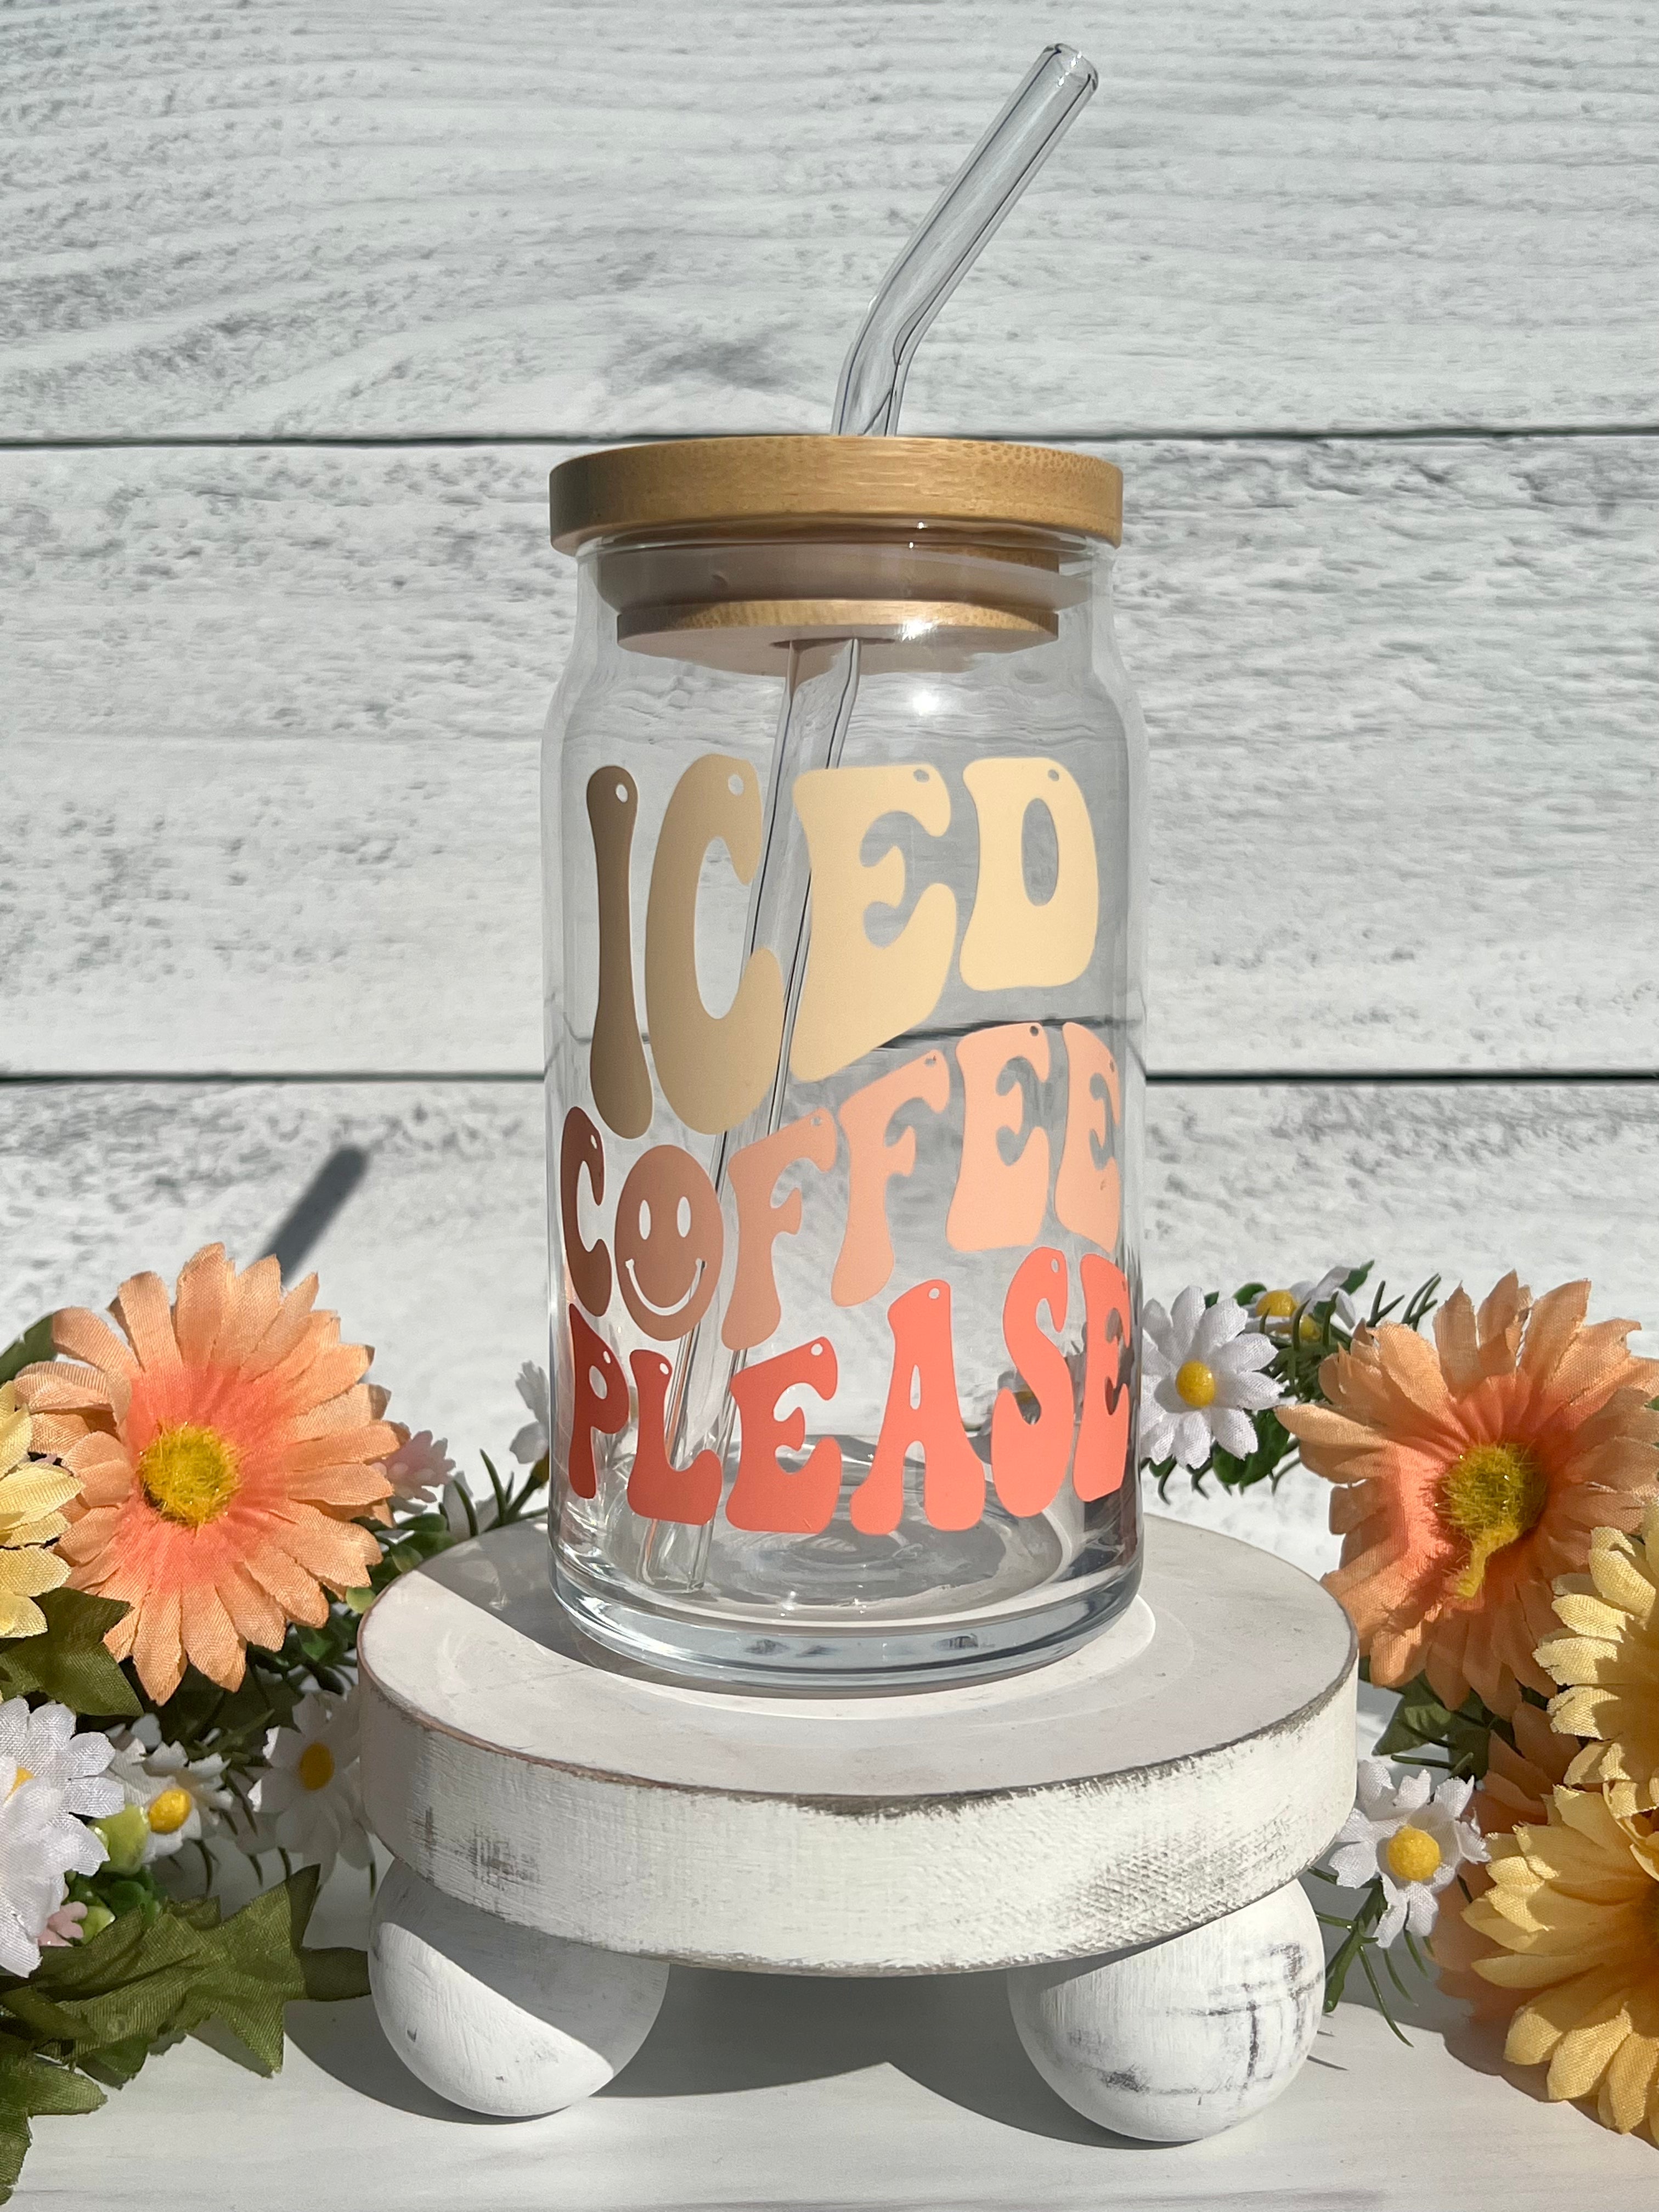 Good Day Glass Can | Iced Coffee Glass Cup | Aesthetic Glass Cup | Glass  Beer Can | Glass Coffee Cup